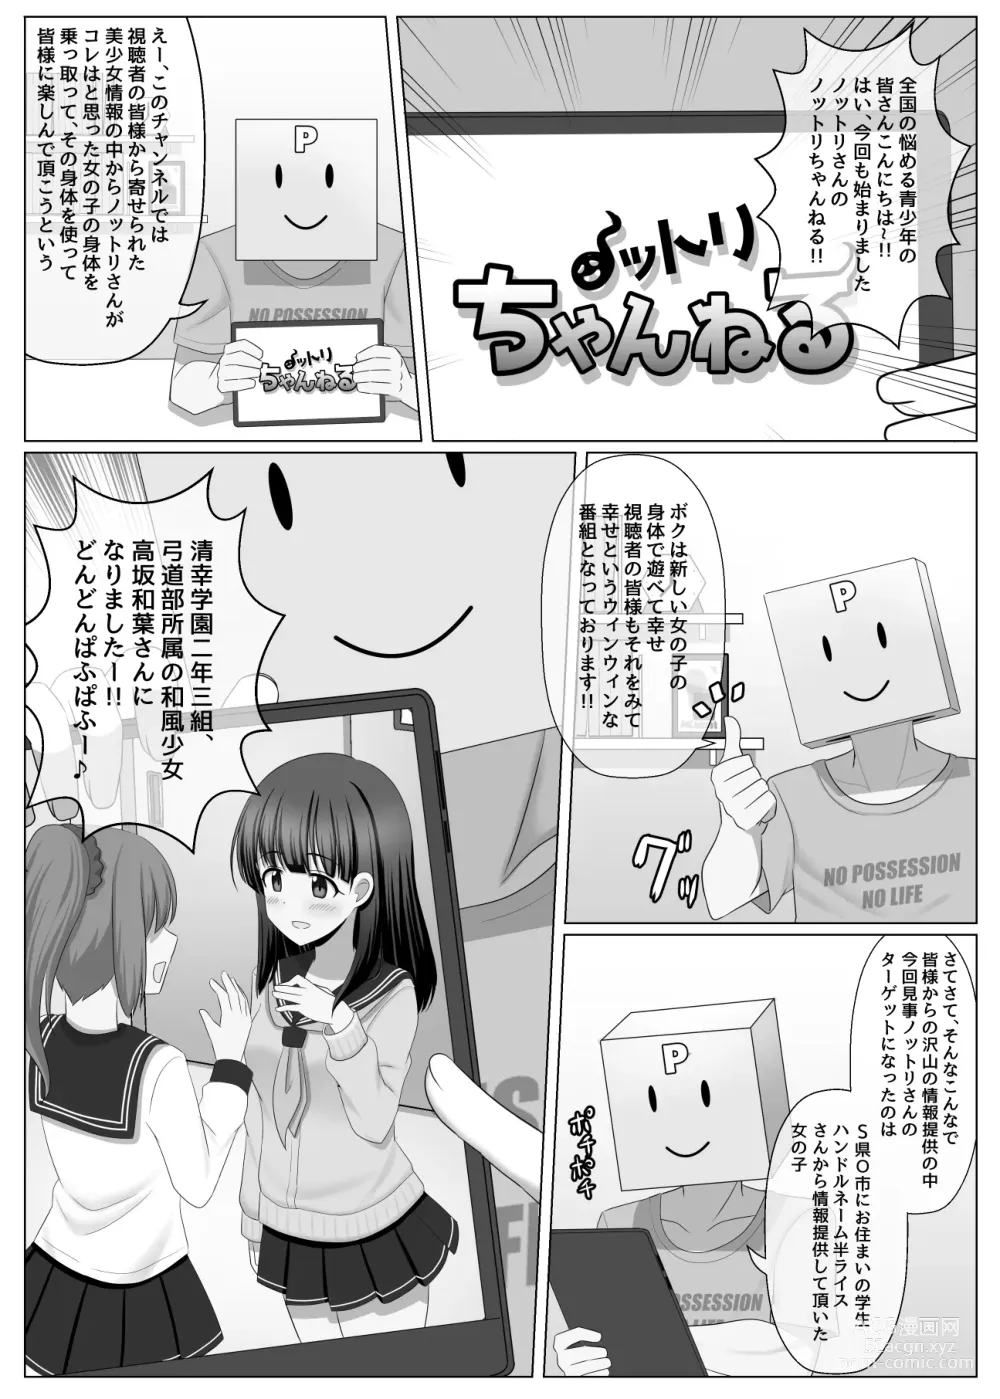 Page 1 of doujinshi Nottori Channel